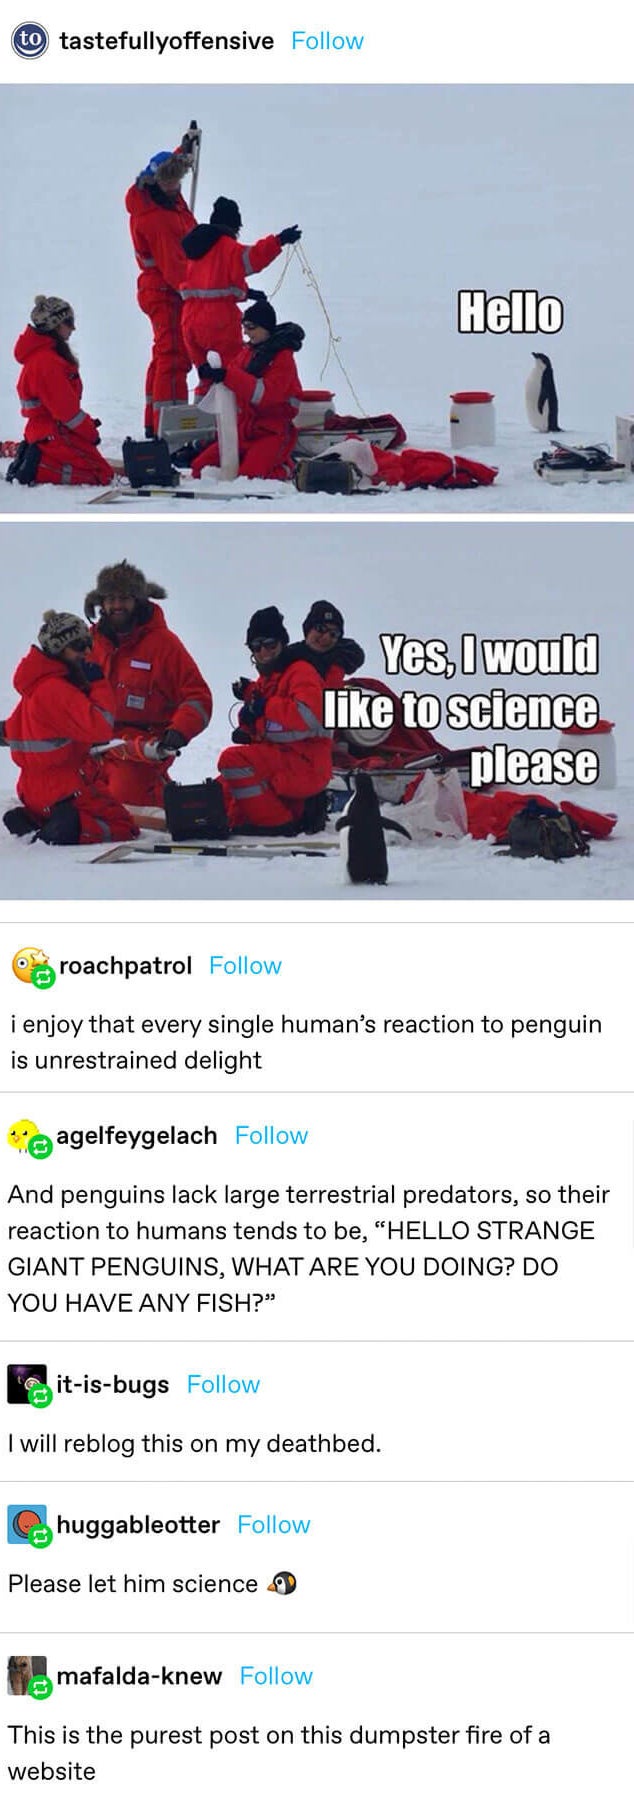 a penguin walks up to scientists on ice with the caption &quot;yes, I would like to science please&quot; and the scientists get super excited